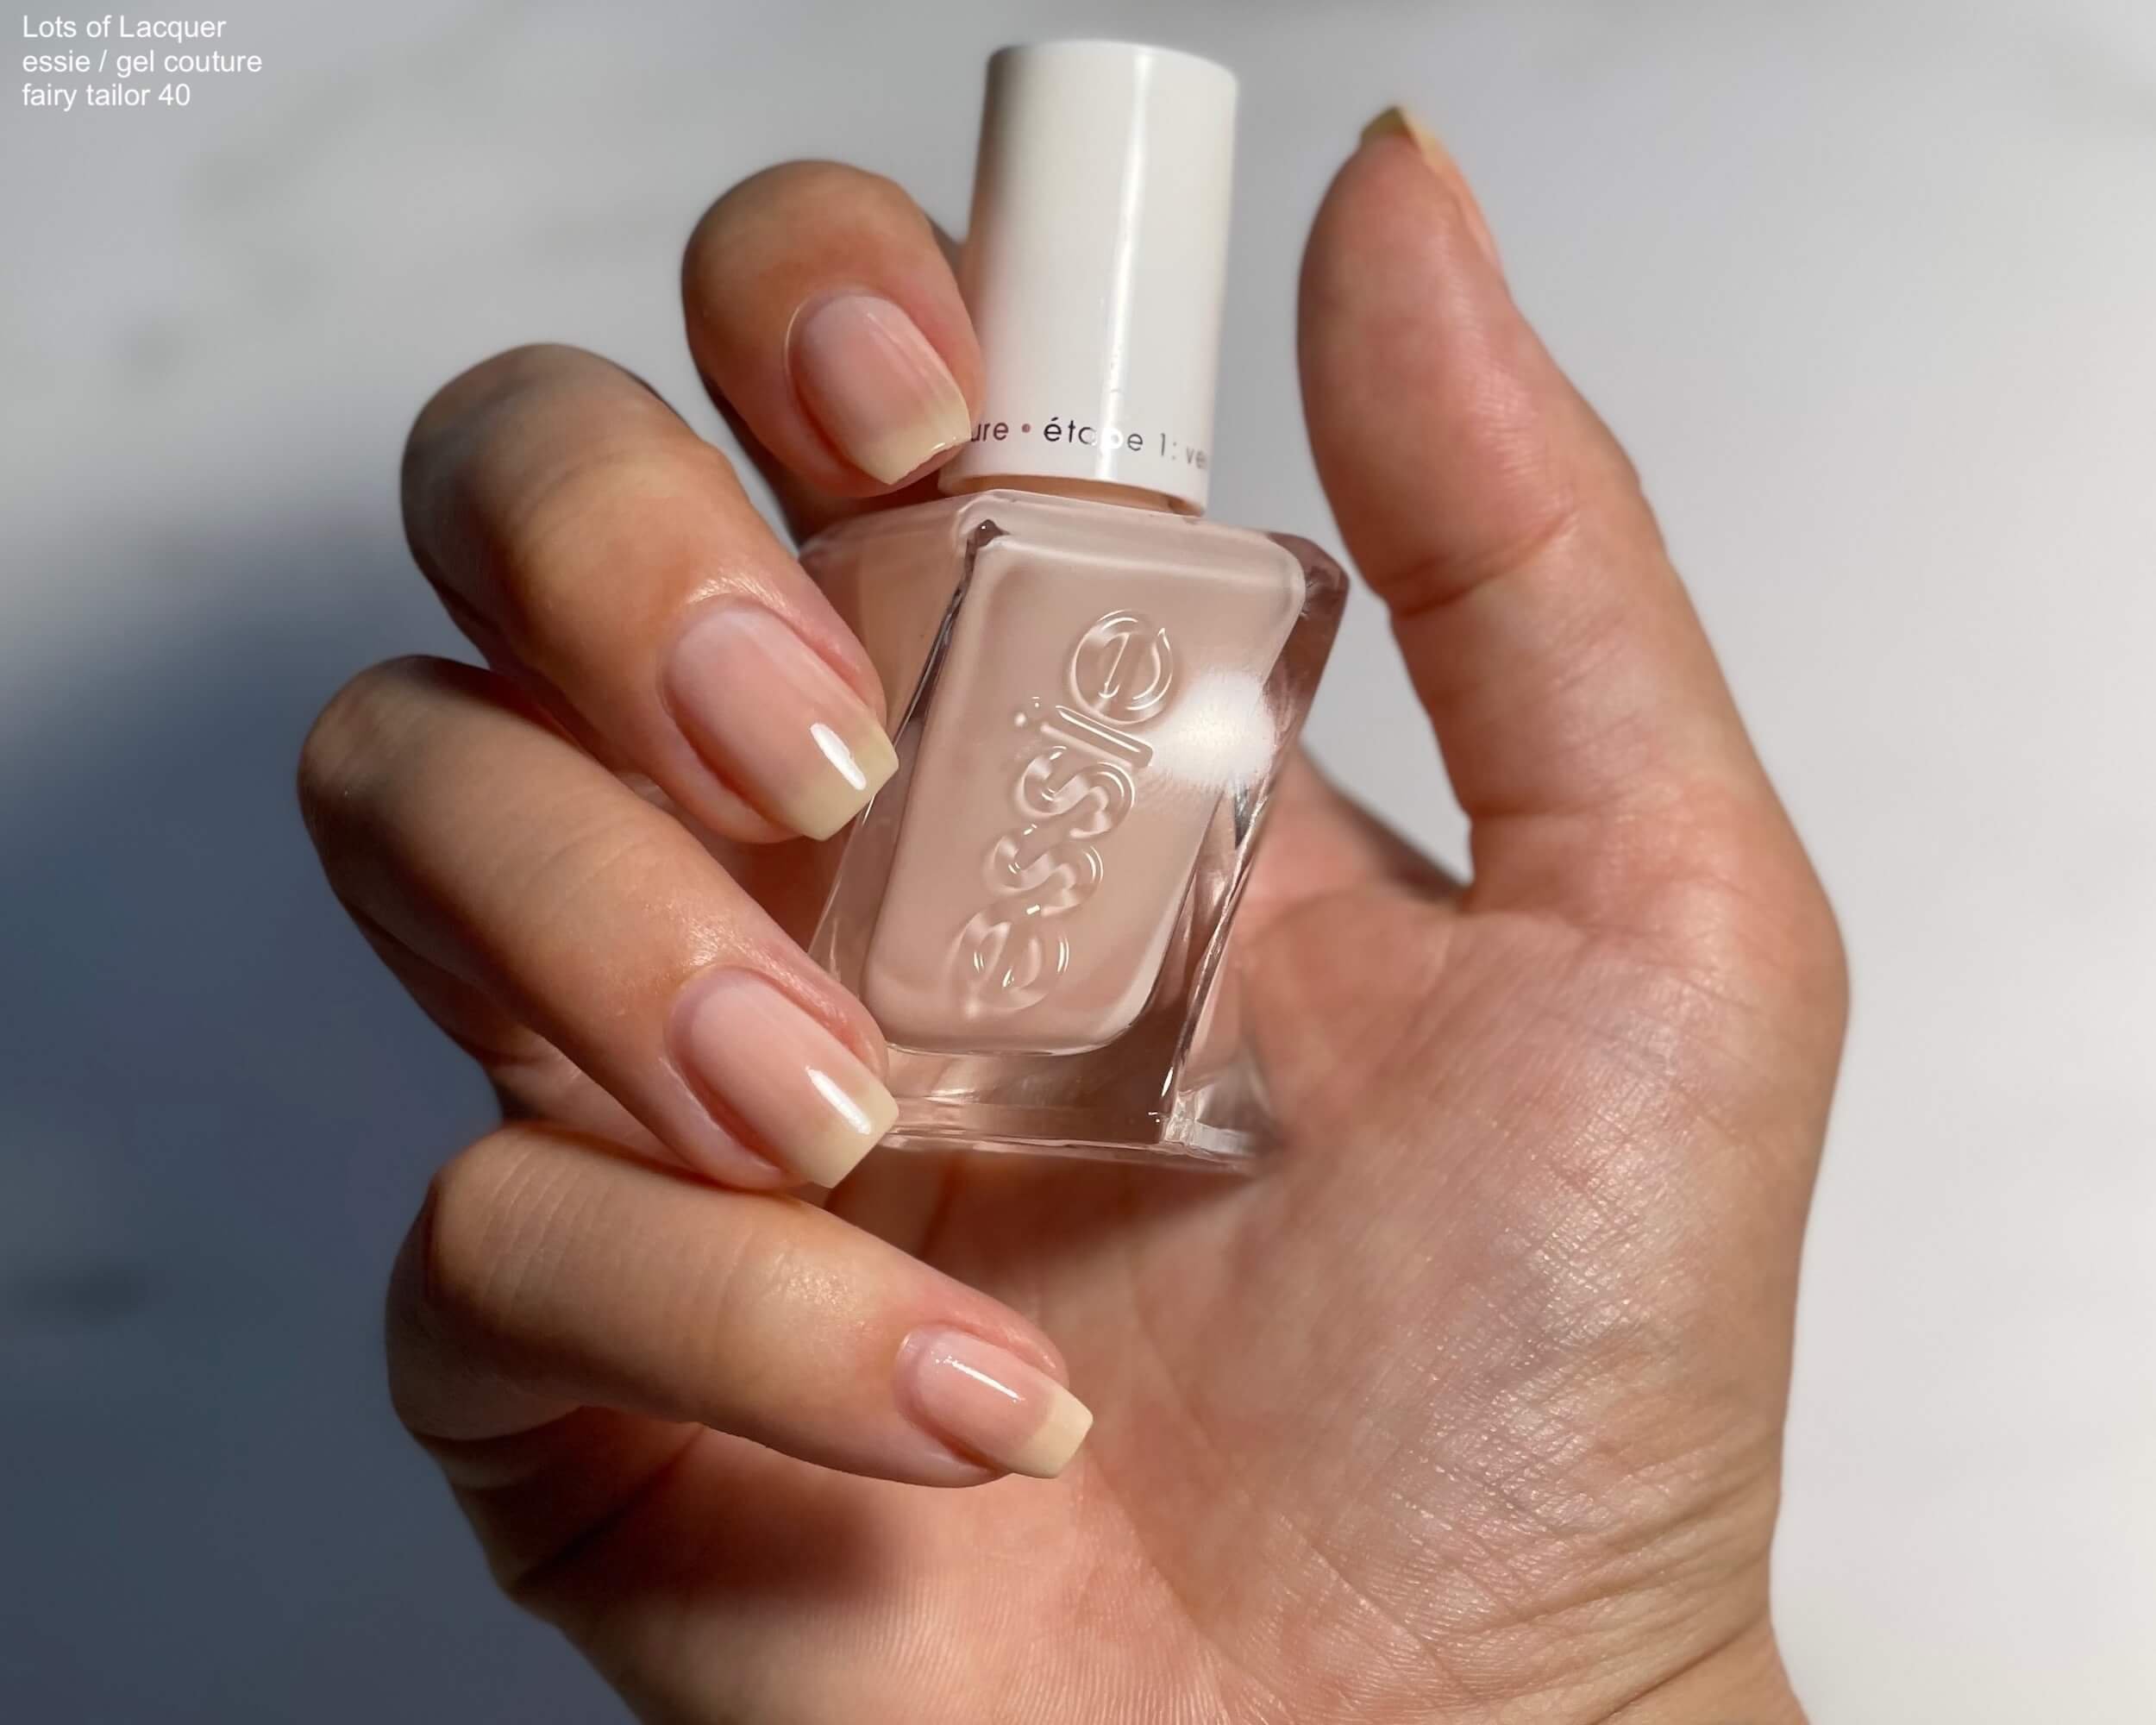 2. Essie Gel Couture Nail Polish, Fairy Tailor - wide 4